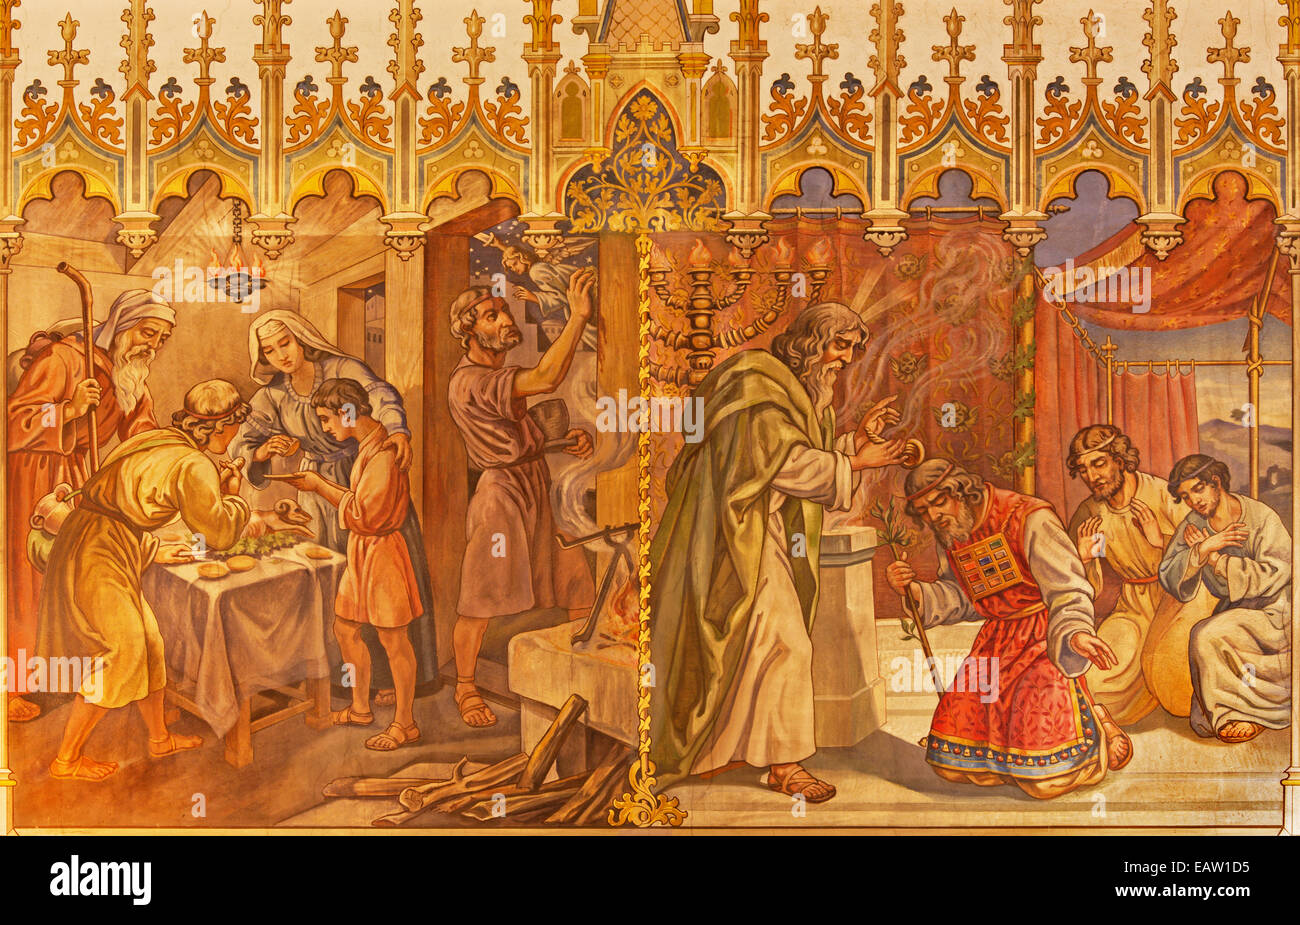 Trnava - fresco of  scenes Moses and Aron, and Israelites at the Pesach supper at the Lord's Passover in St. Nicholas church. Stock Photo